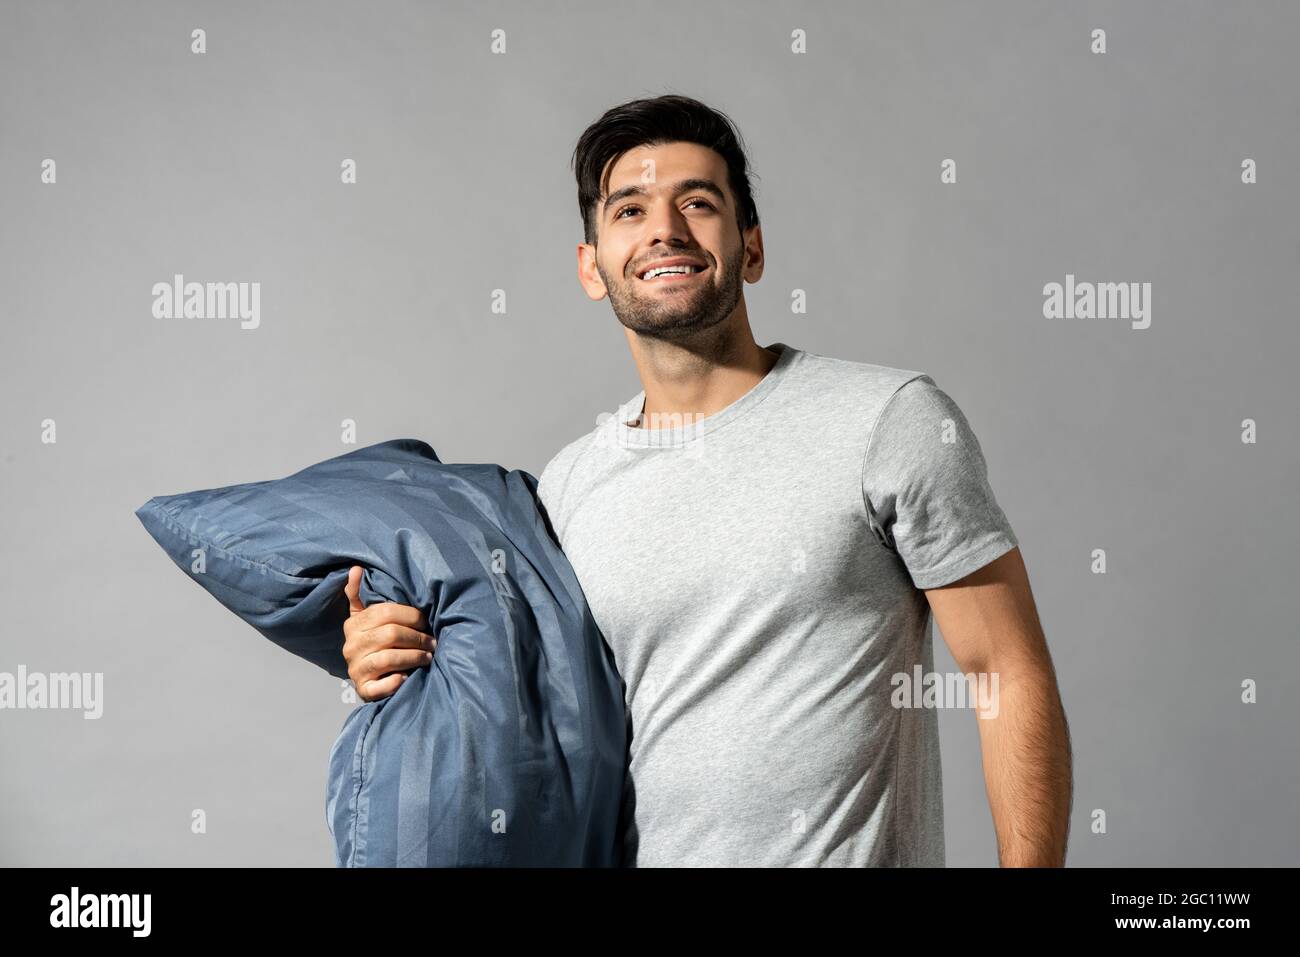 Smiling fresh young man in sleepwear holding pillow looking upward in isolated light gray studio background Stock Photo